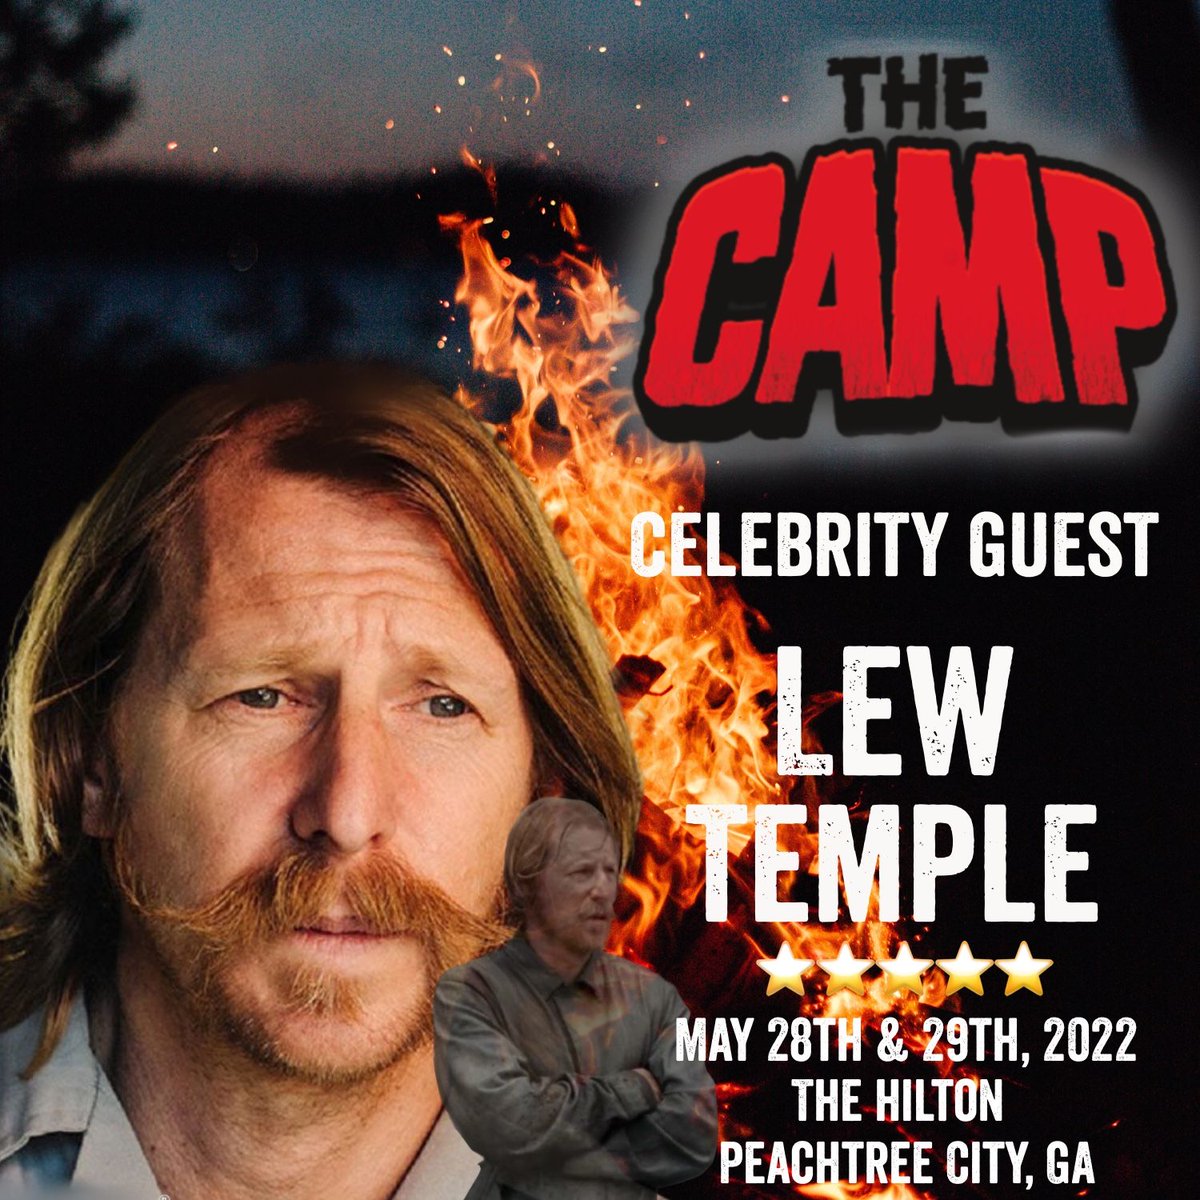 We are so excited to welcome @LewTempleActor (Axel on #TWD and Noel Kluggs in Halloween) back to The Camp this May! Come see Lew in Peachtree City, GA this Memorial Day Weekend! . ℹ️ thecampevents.com/may 🎟 tickets.thecampevents.com⠀⠀ 💻 #TheCamp #TheCamp2022 #TWDFamily